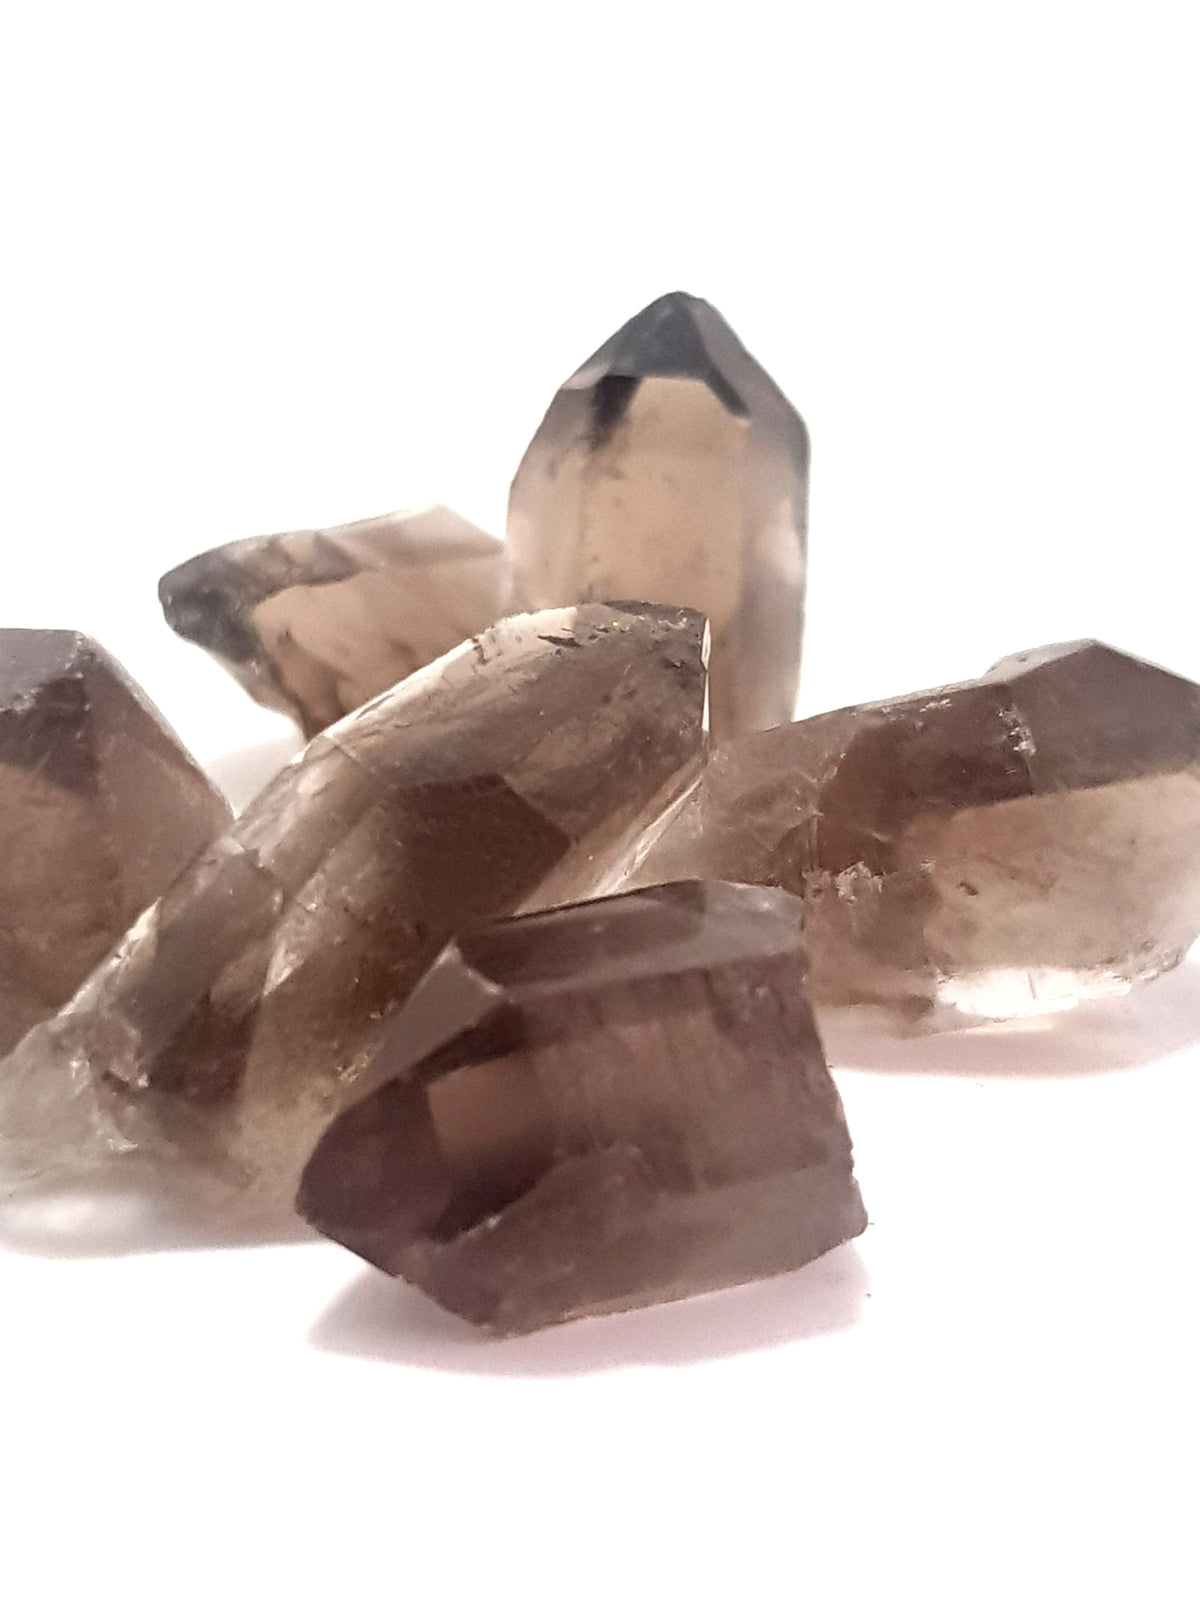 six natural points of smoky quartz. the crystals are well formed. the colour is dark. They are translucent